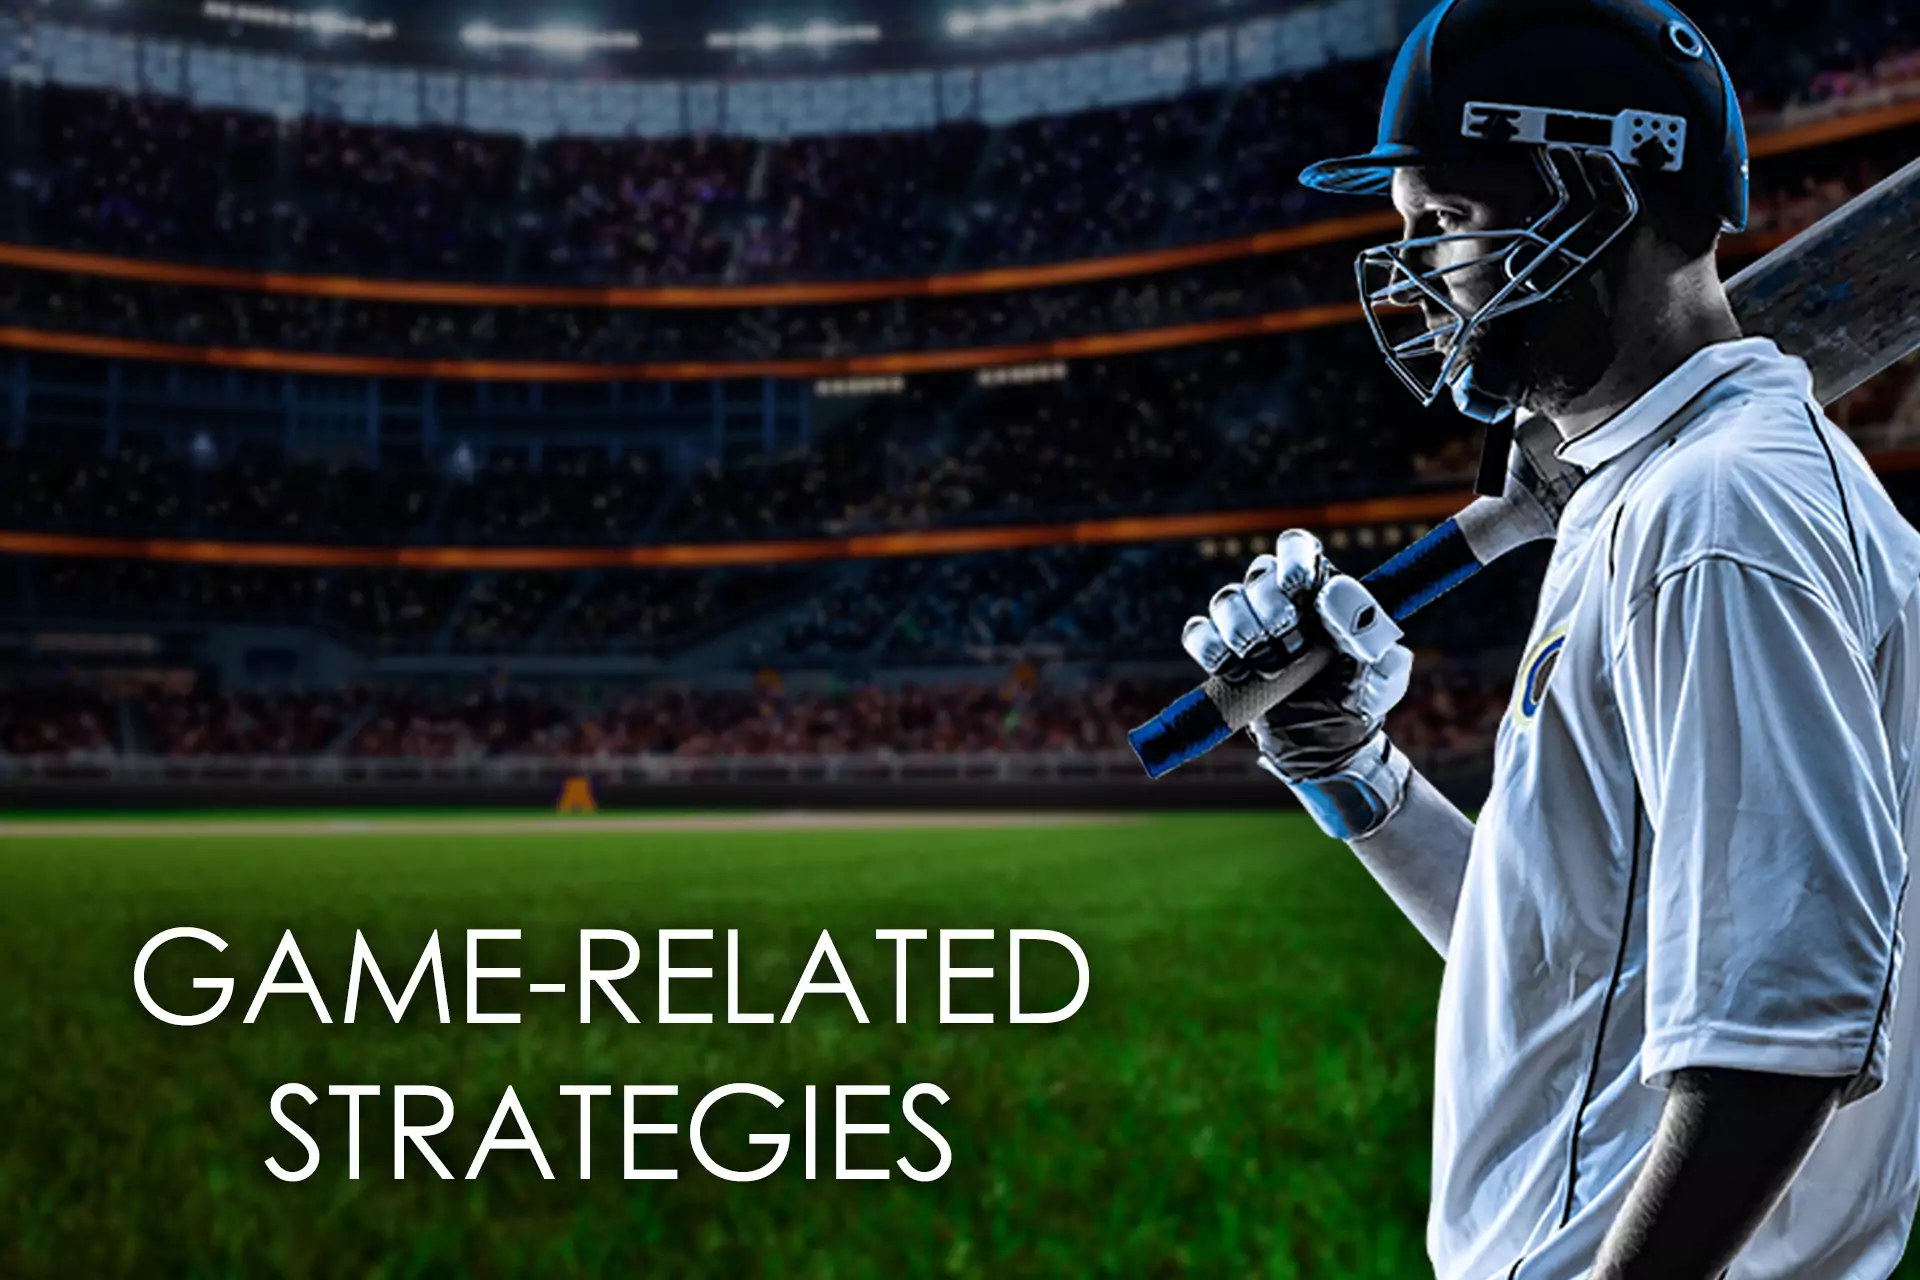 You need to know characteristics of tournaments and players to use game-related strategies for predictions.